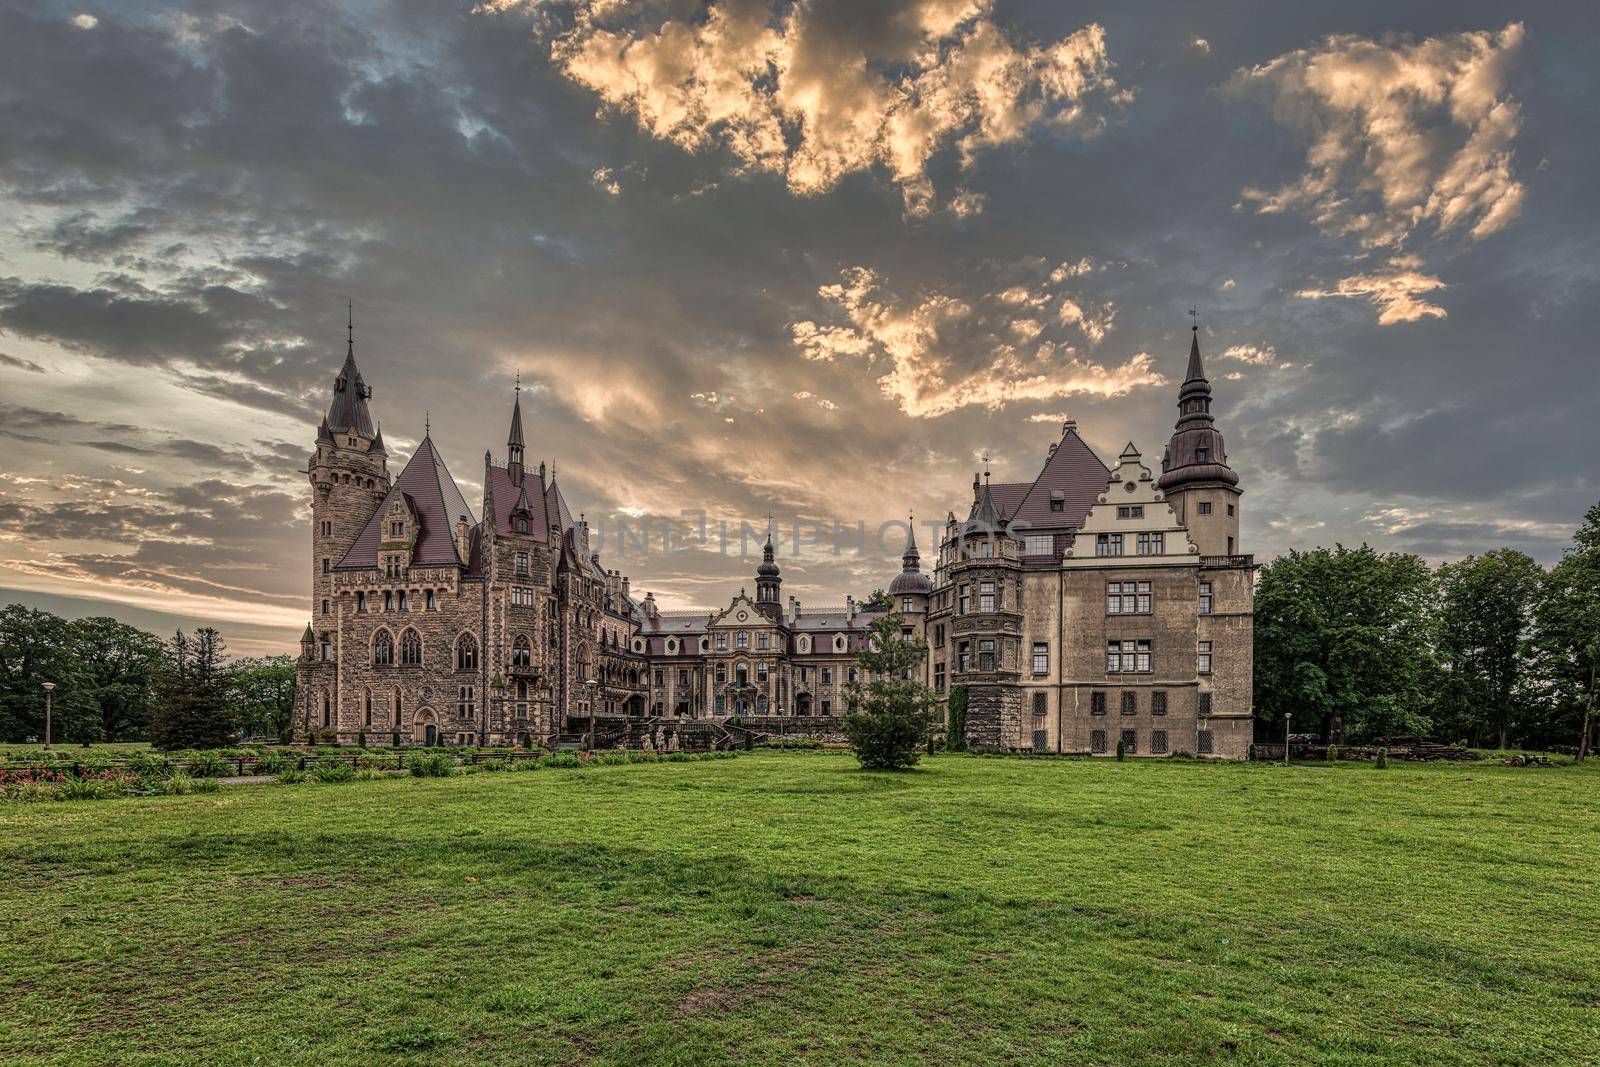 The Moszna Castle is a historic palace located in a small village in Moszna is one of the best known monuments in Upper Silesia.